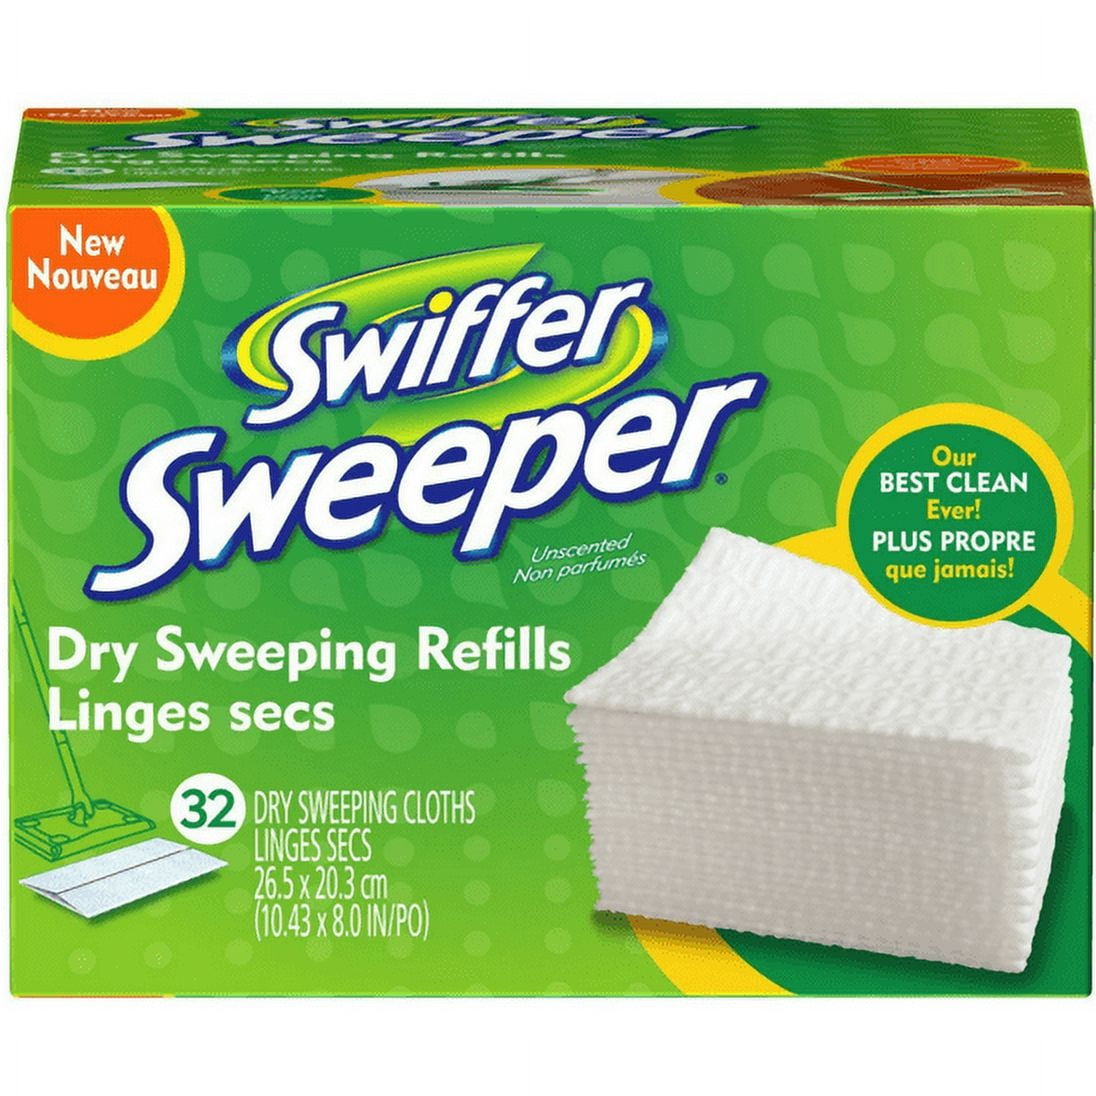 Swiffer Sweeper Dry Refills Cloths - 32 count